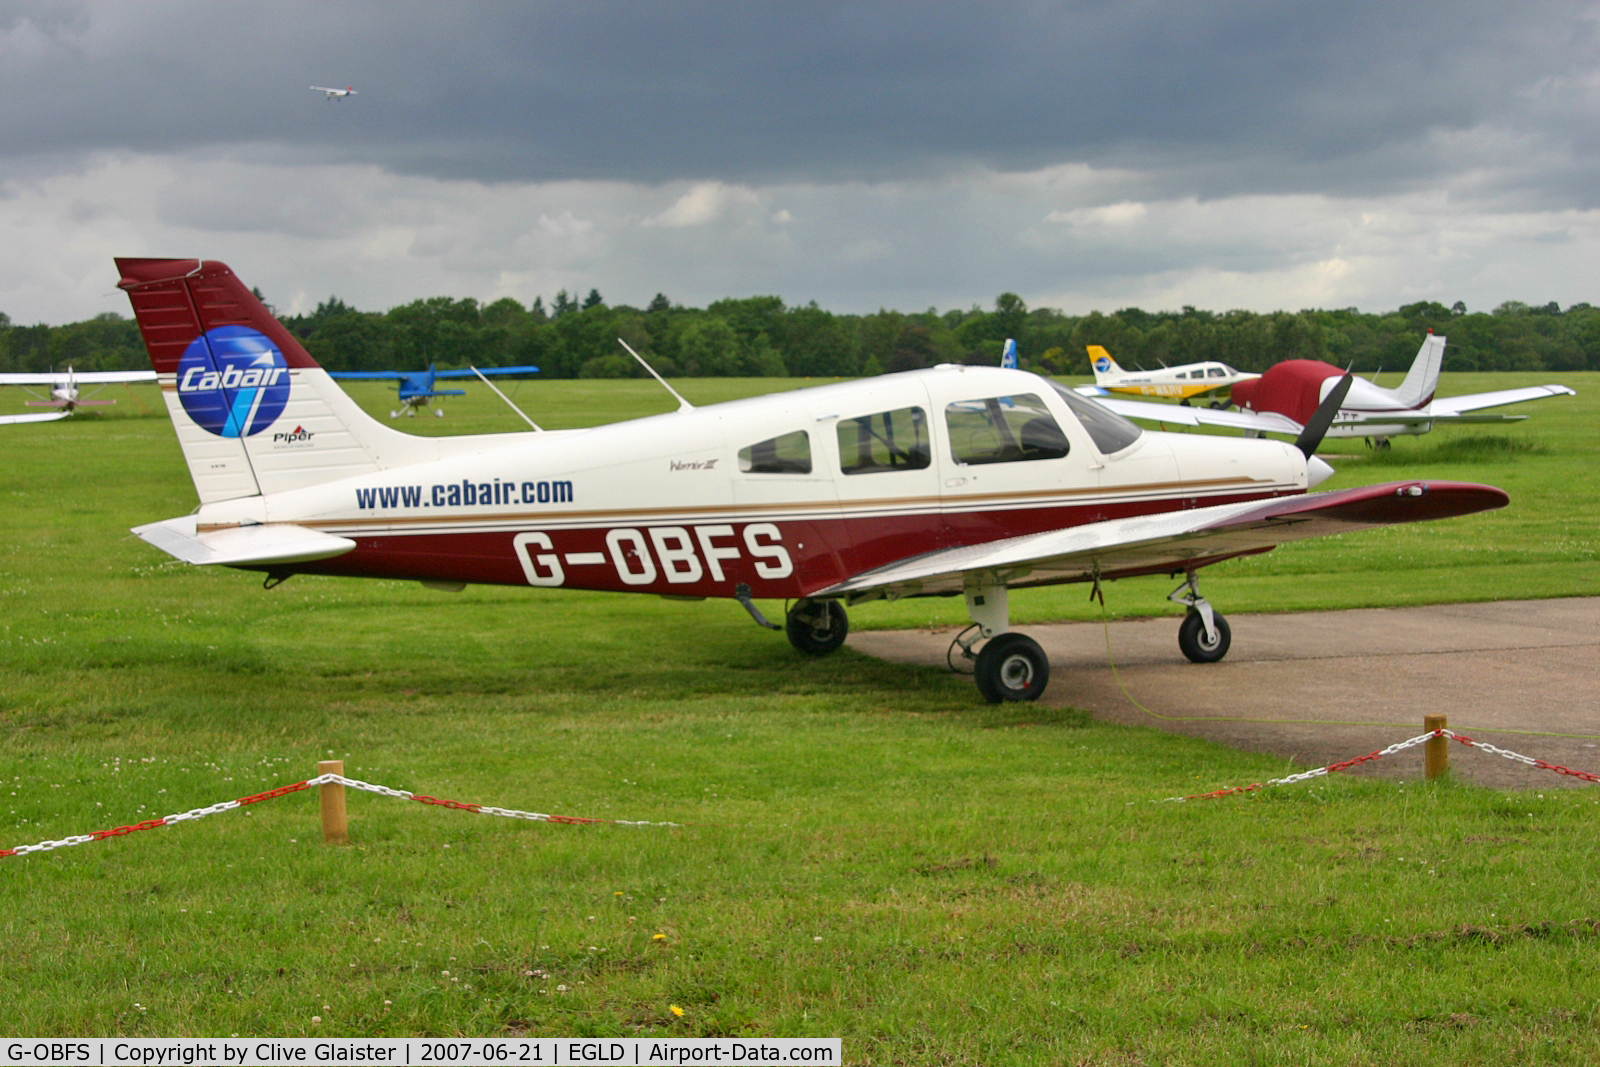 G-OBFS, 1998 Piper PA-28-161 Warrior III C/N 28-42039, OWNED BY: PLANE TALKING LTD op by: CABAIR